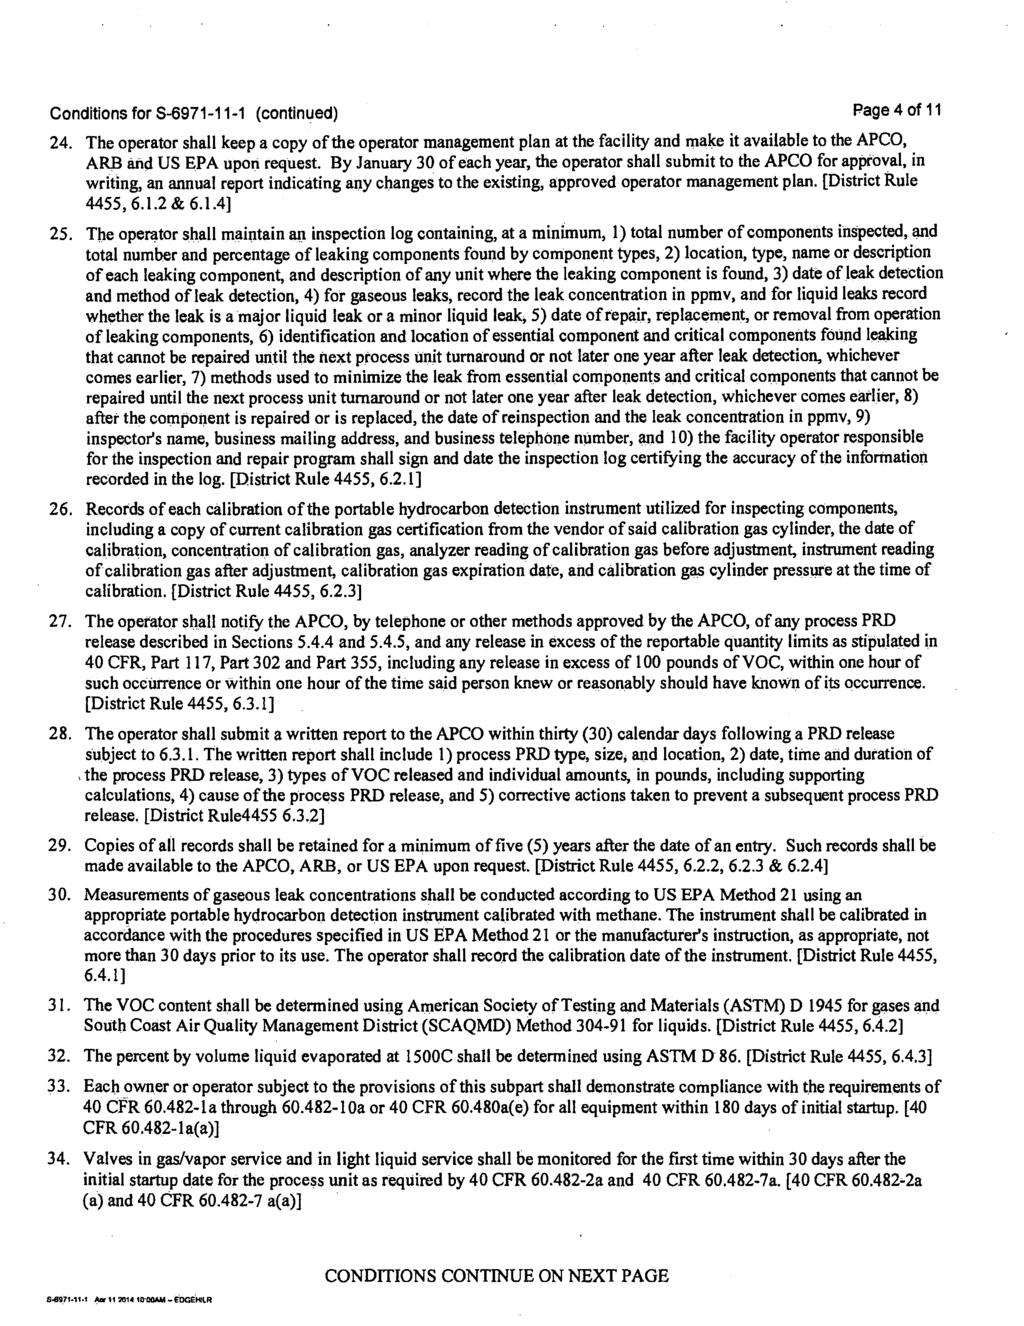 Conditions for S-6971-11-1 (continued) Page 4 of 11 24. The operator shall keep a copy of the operator management plan at the facility and make it available to the APCO, ARB and US EPA upon request.